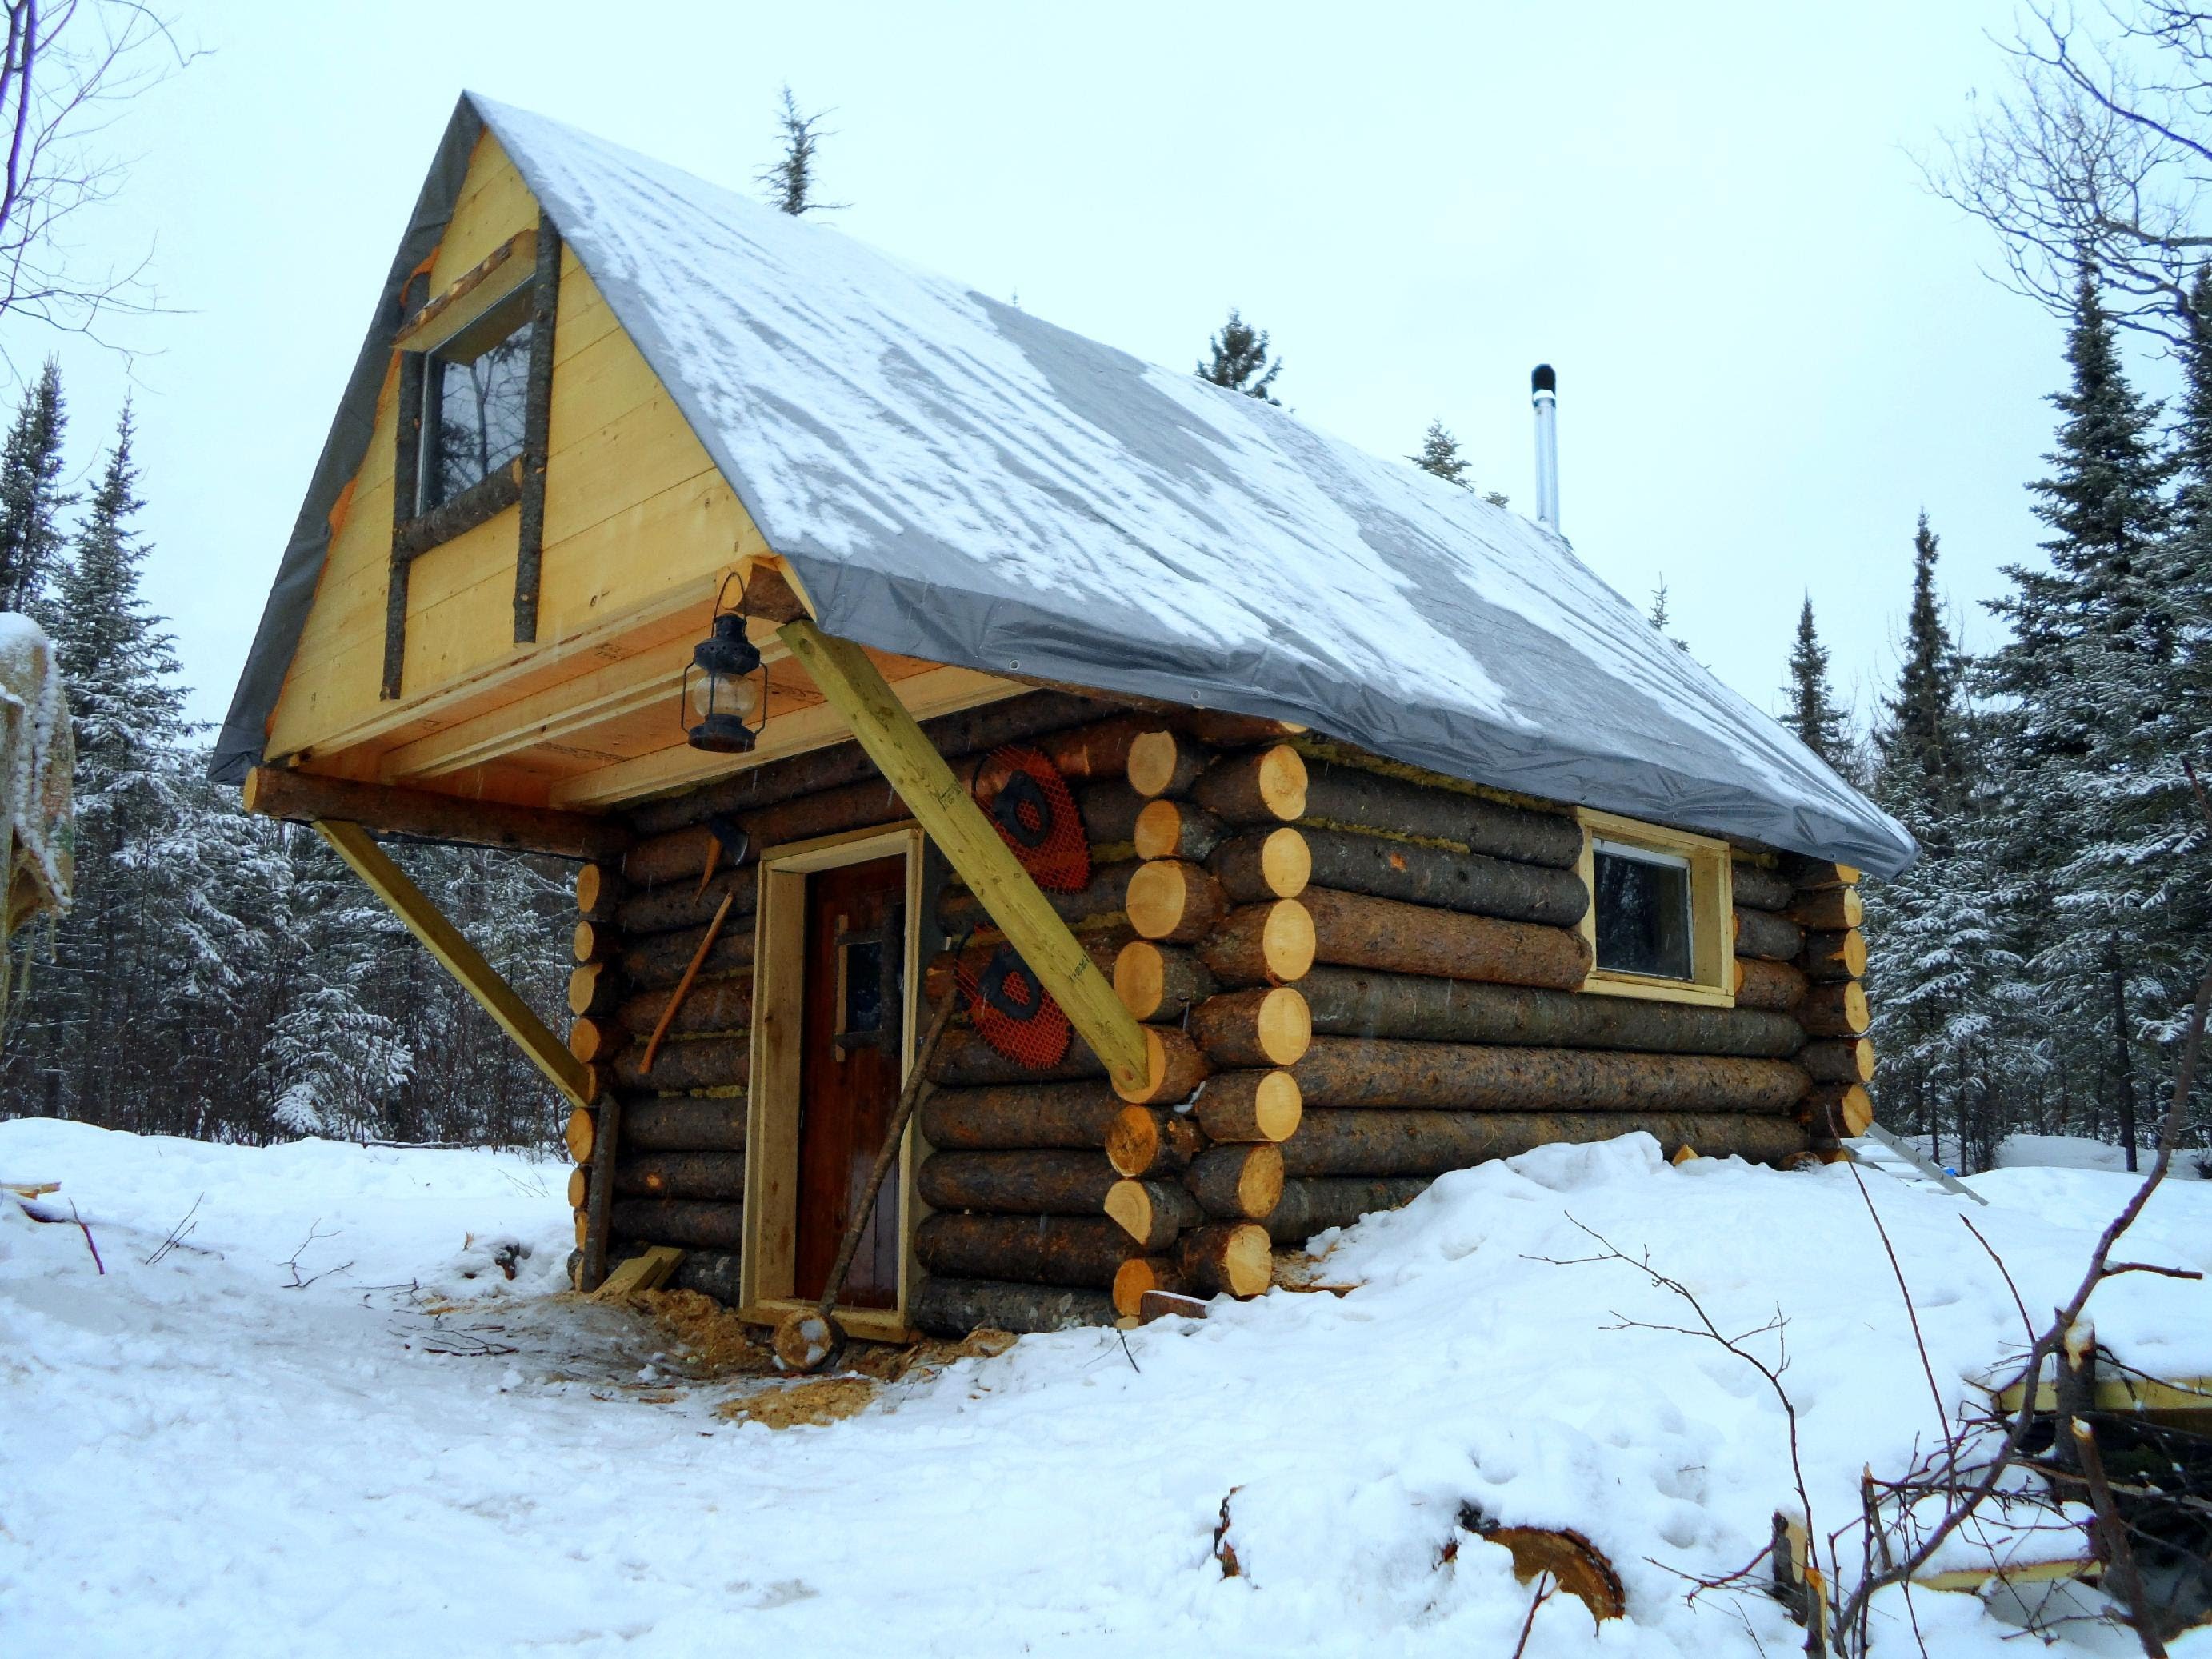 Cozy Log Cabin- How I built it for less than $500. - YouTube